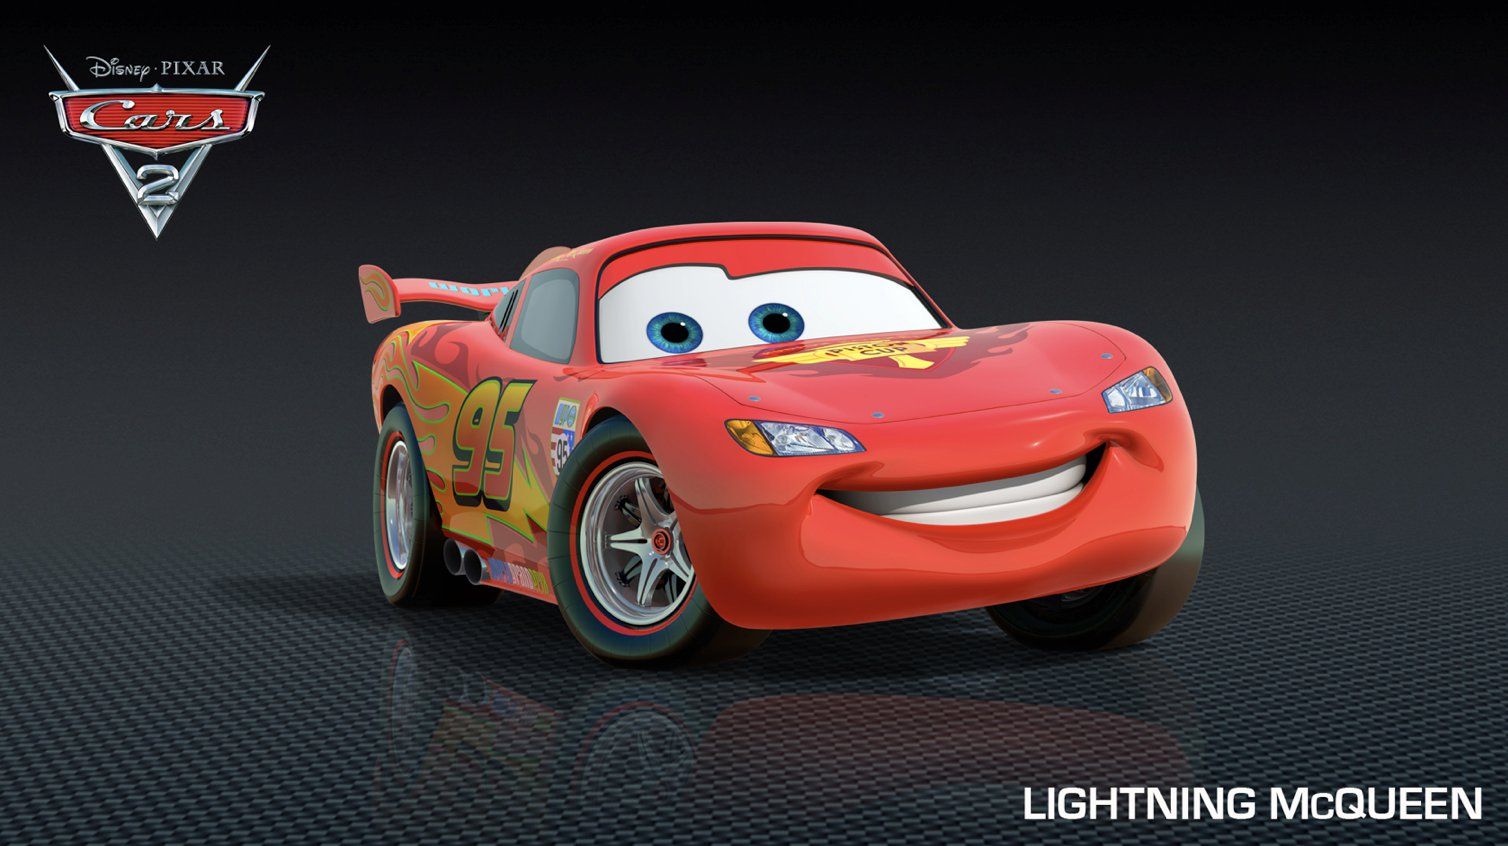 Exclusive Cars 2 Animated Movie Cartoon HD Background Image for iPod